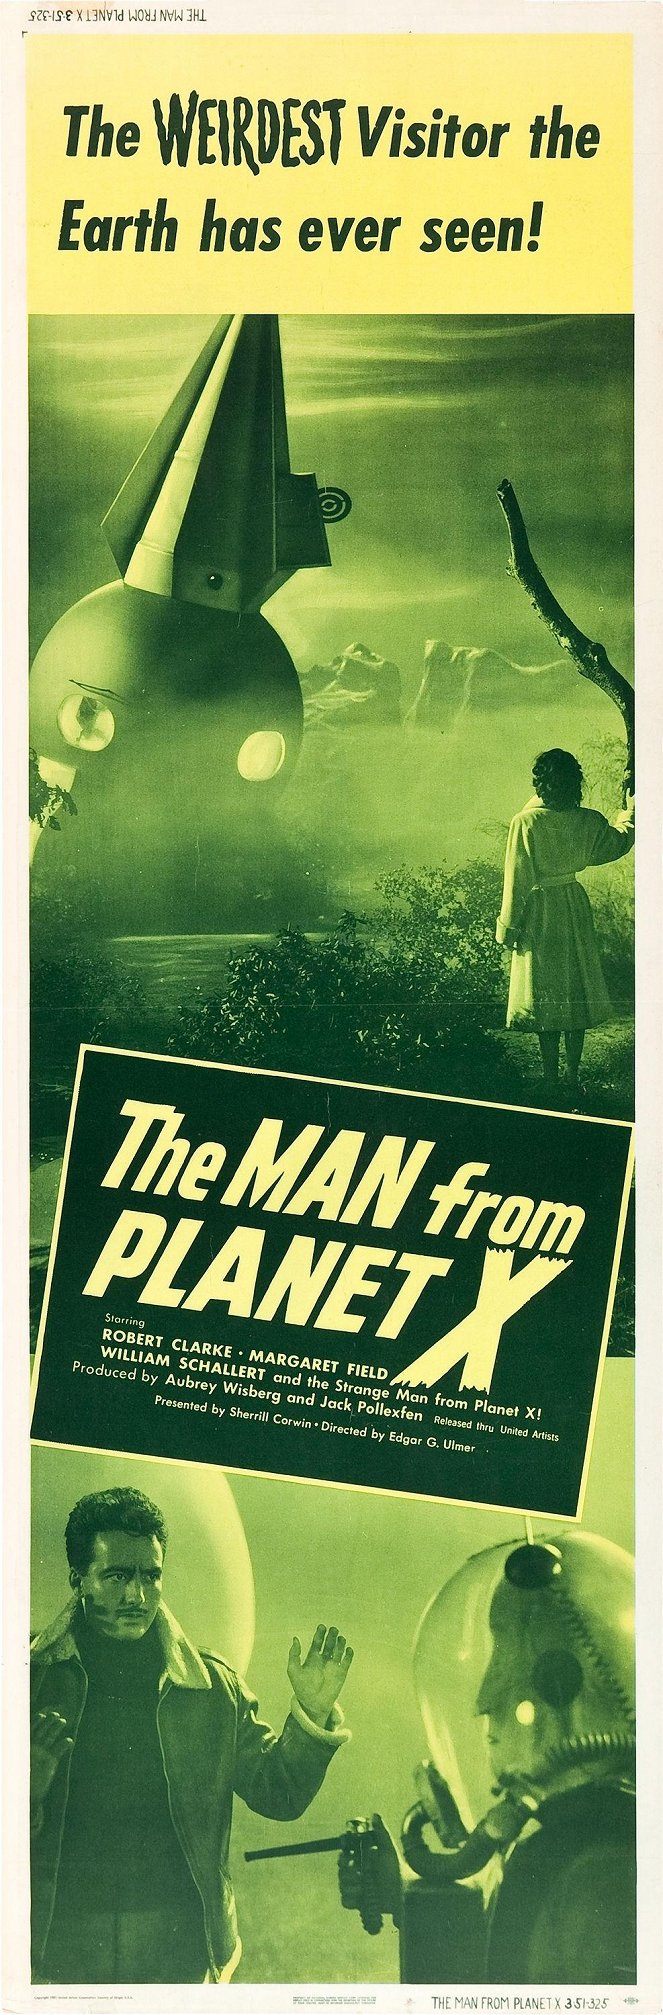 The Man from Planet X - Affiches